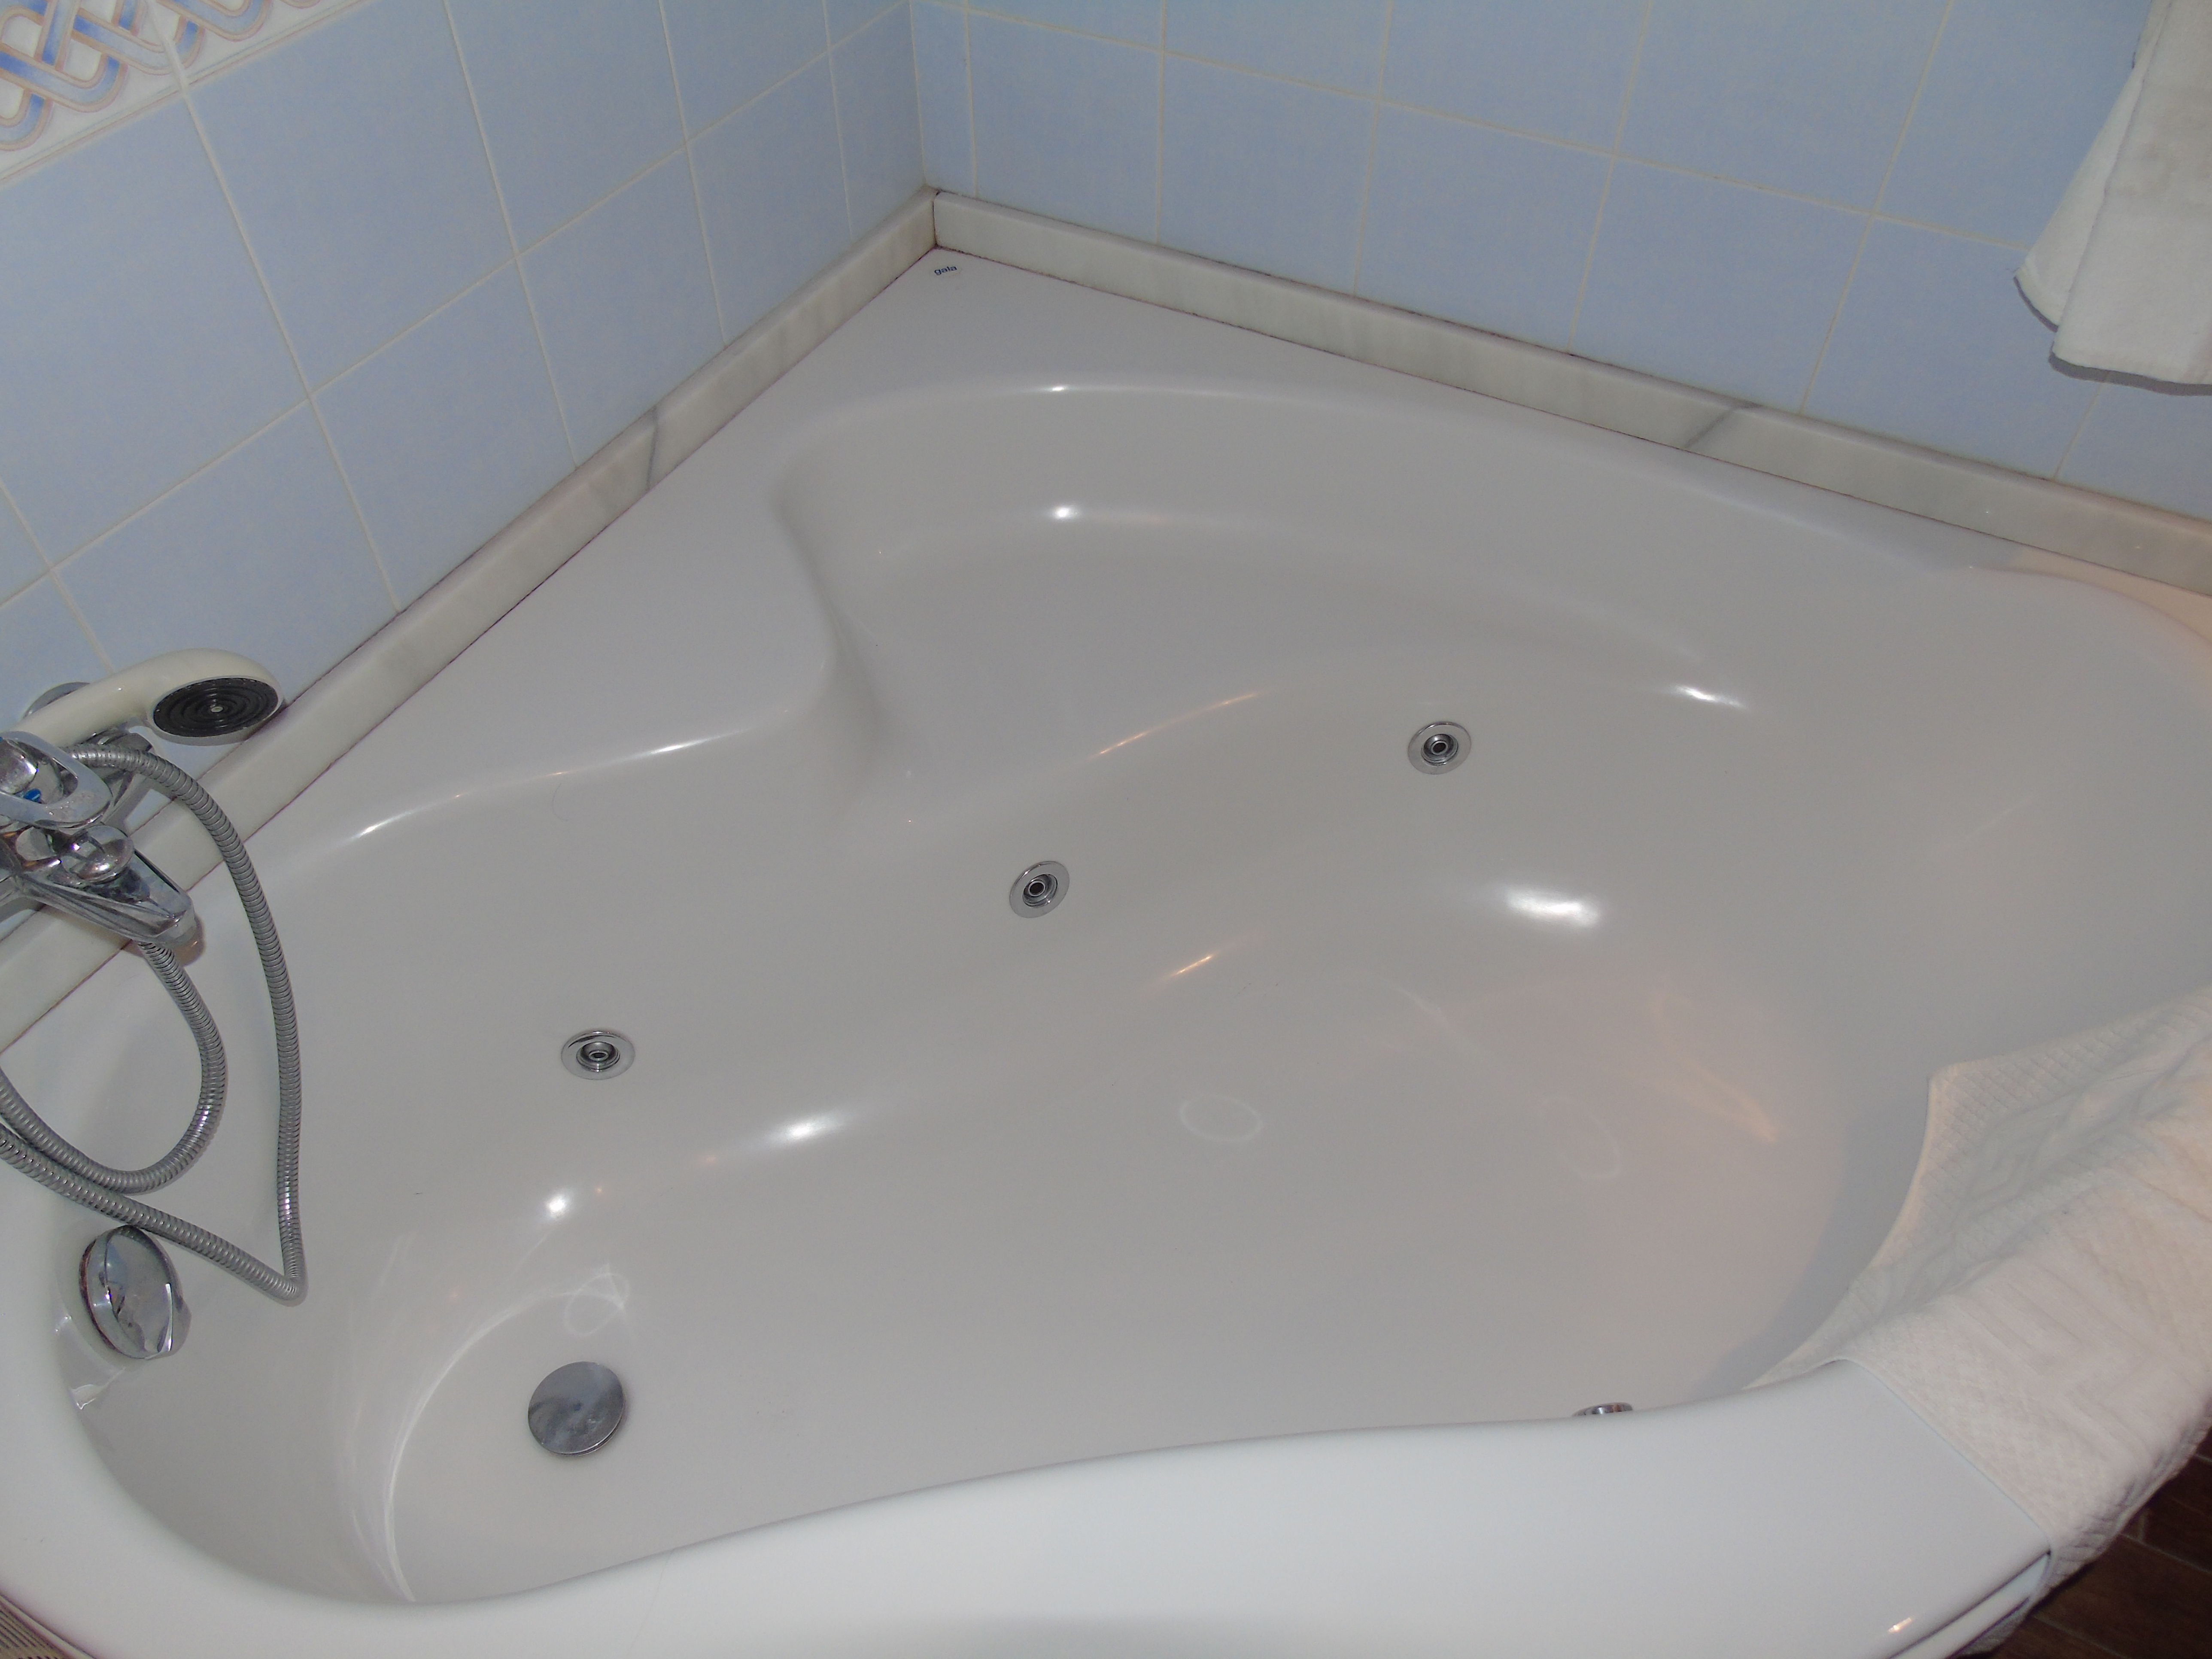 hydromassage bathtub available in the study